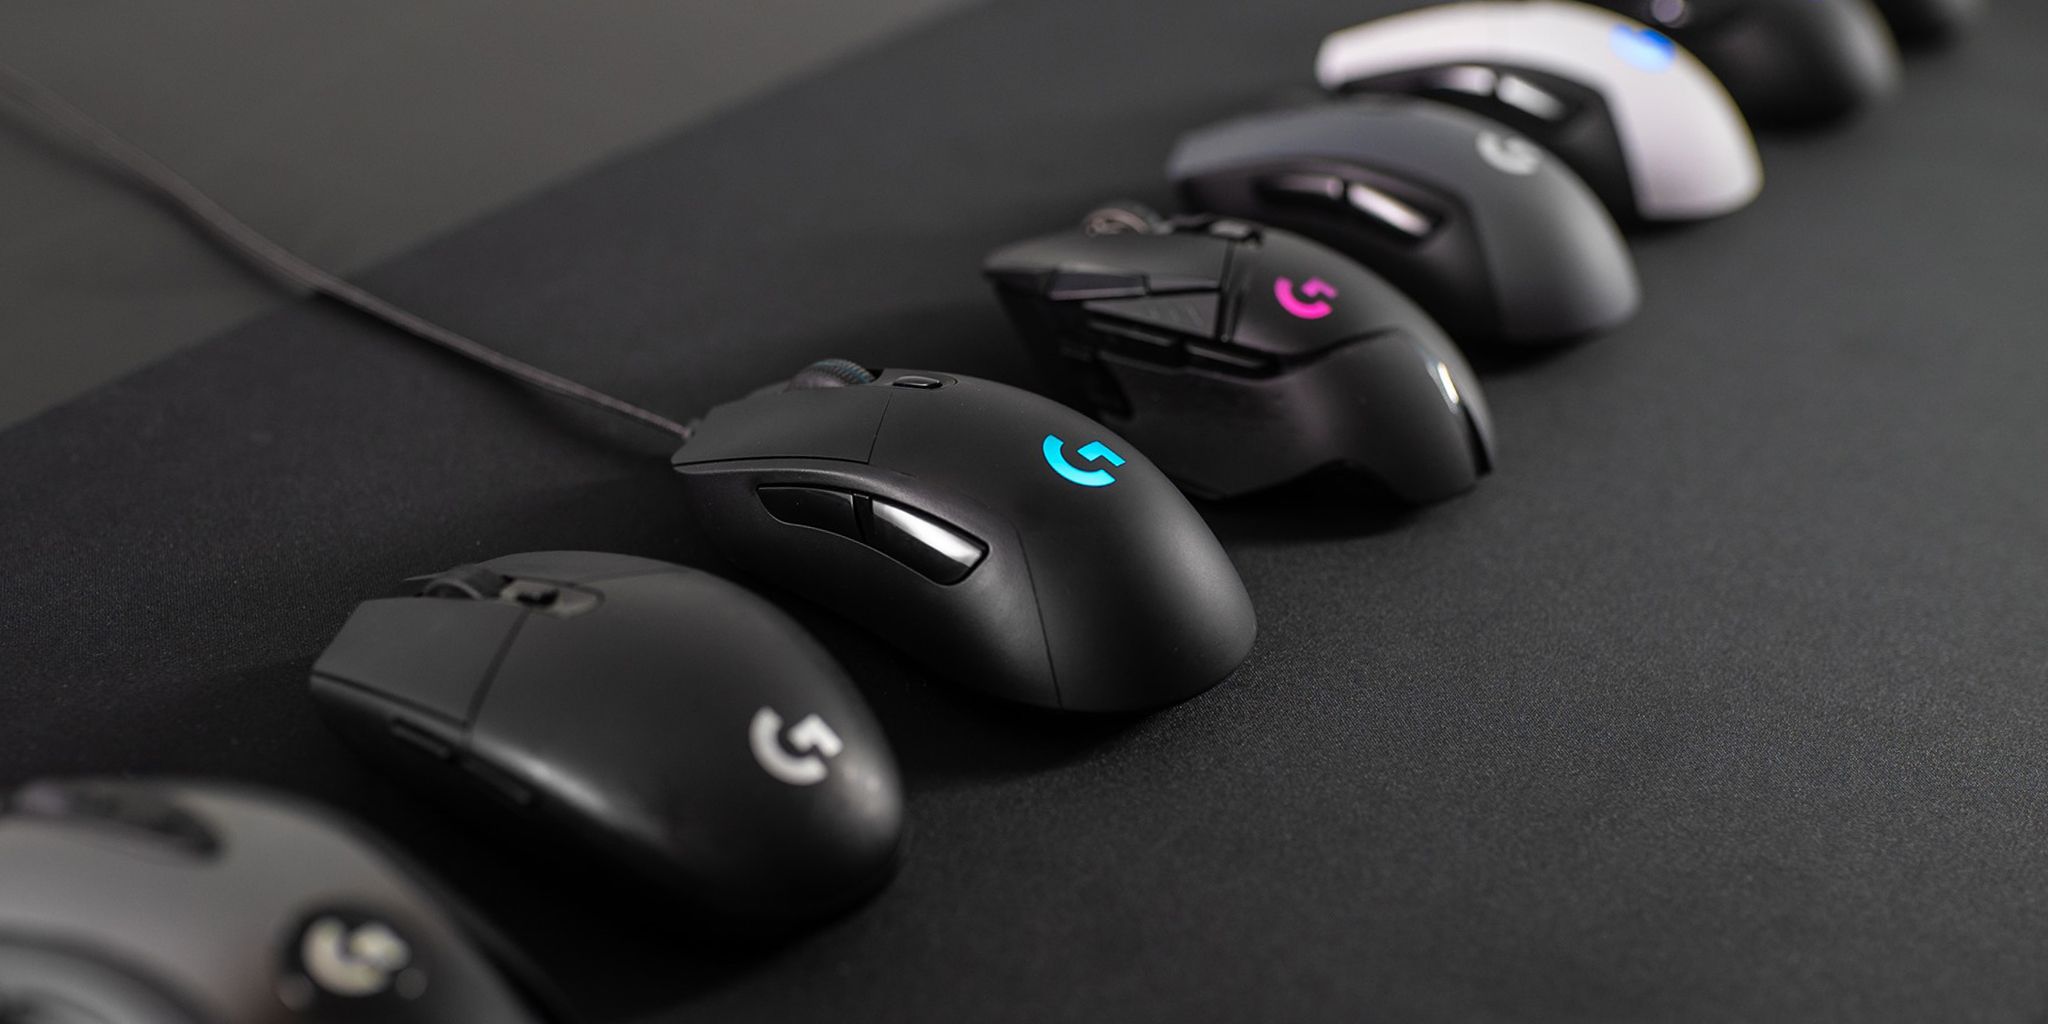 6 Best Logitech Gaming Mice for 2020 - Logitech Gaming Mice